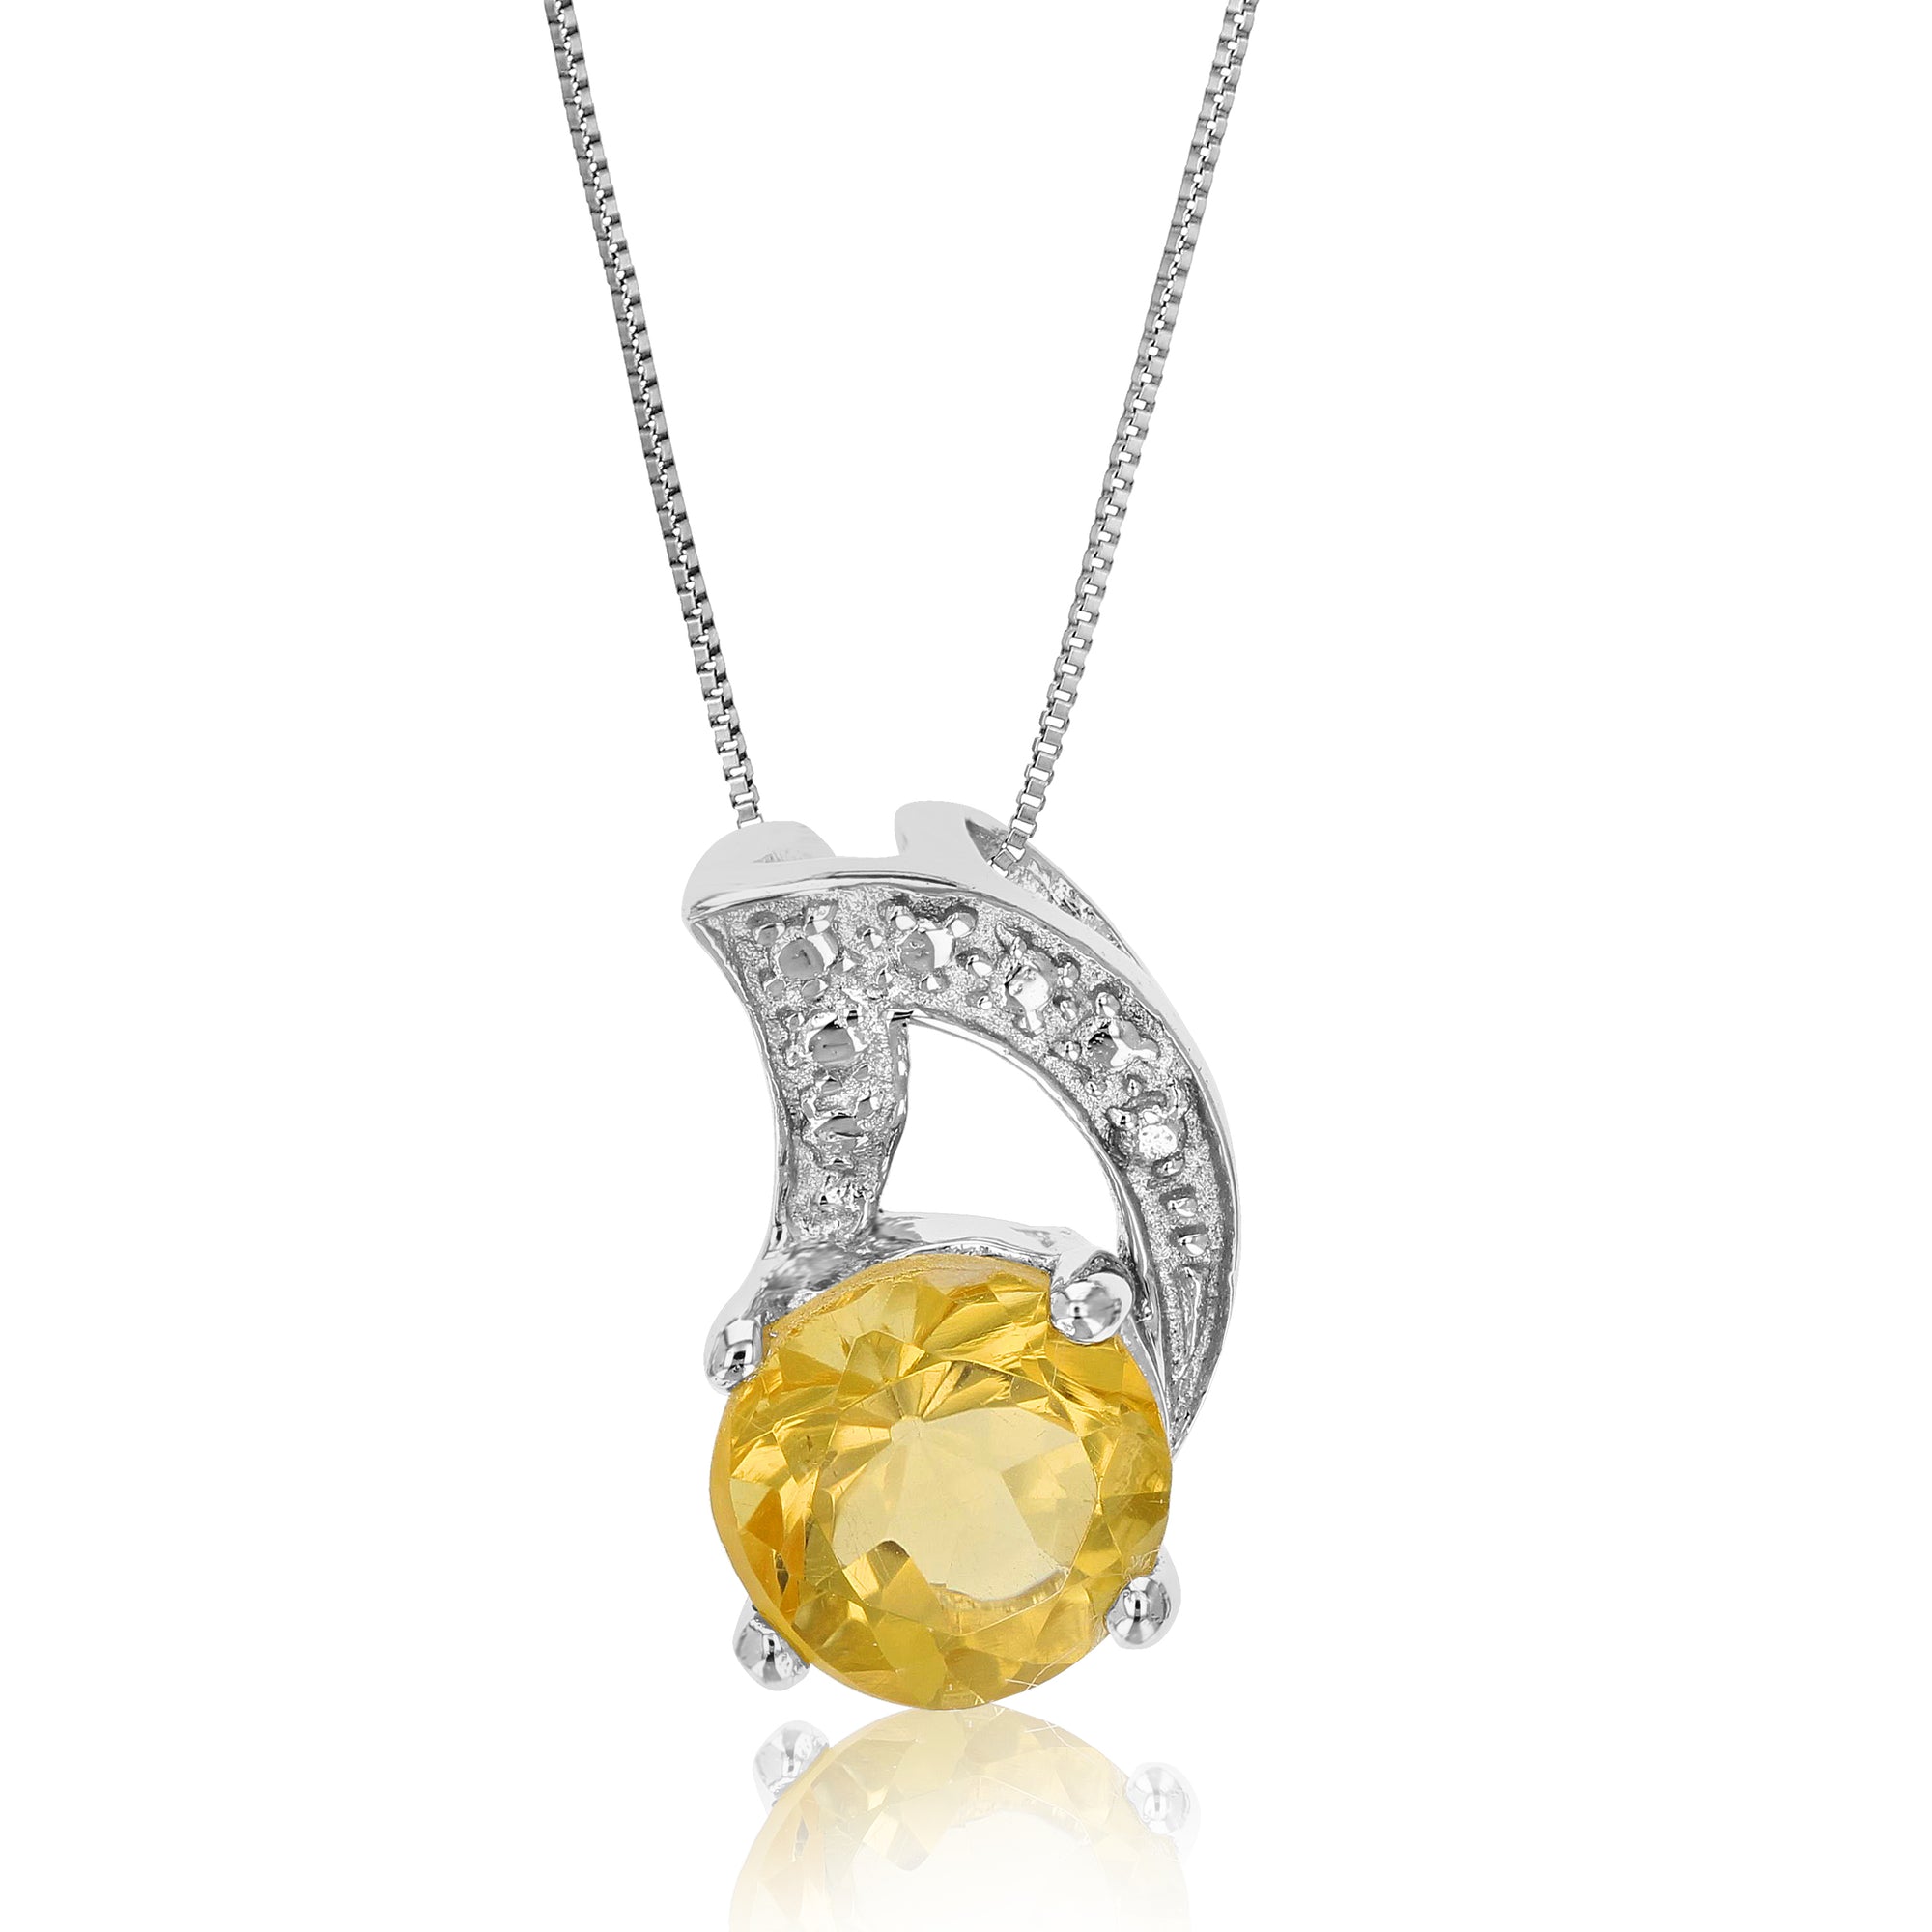 3/4 cttw Pendant Necklace, Citrine Pendant Necklace for Women in .925 Sterling Silver with Rhodium, 18 Inch Chain, Prong Setting